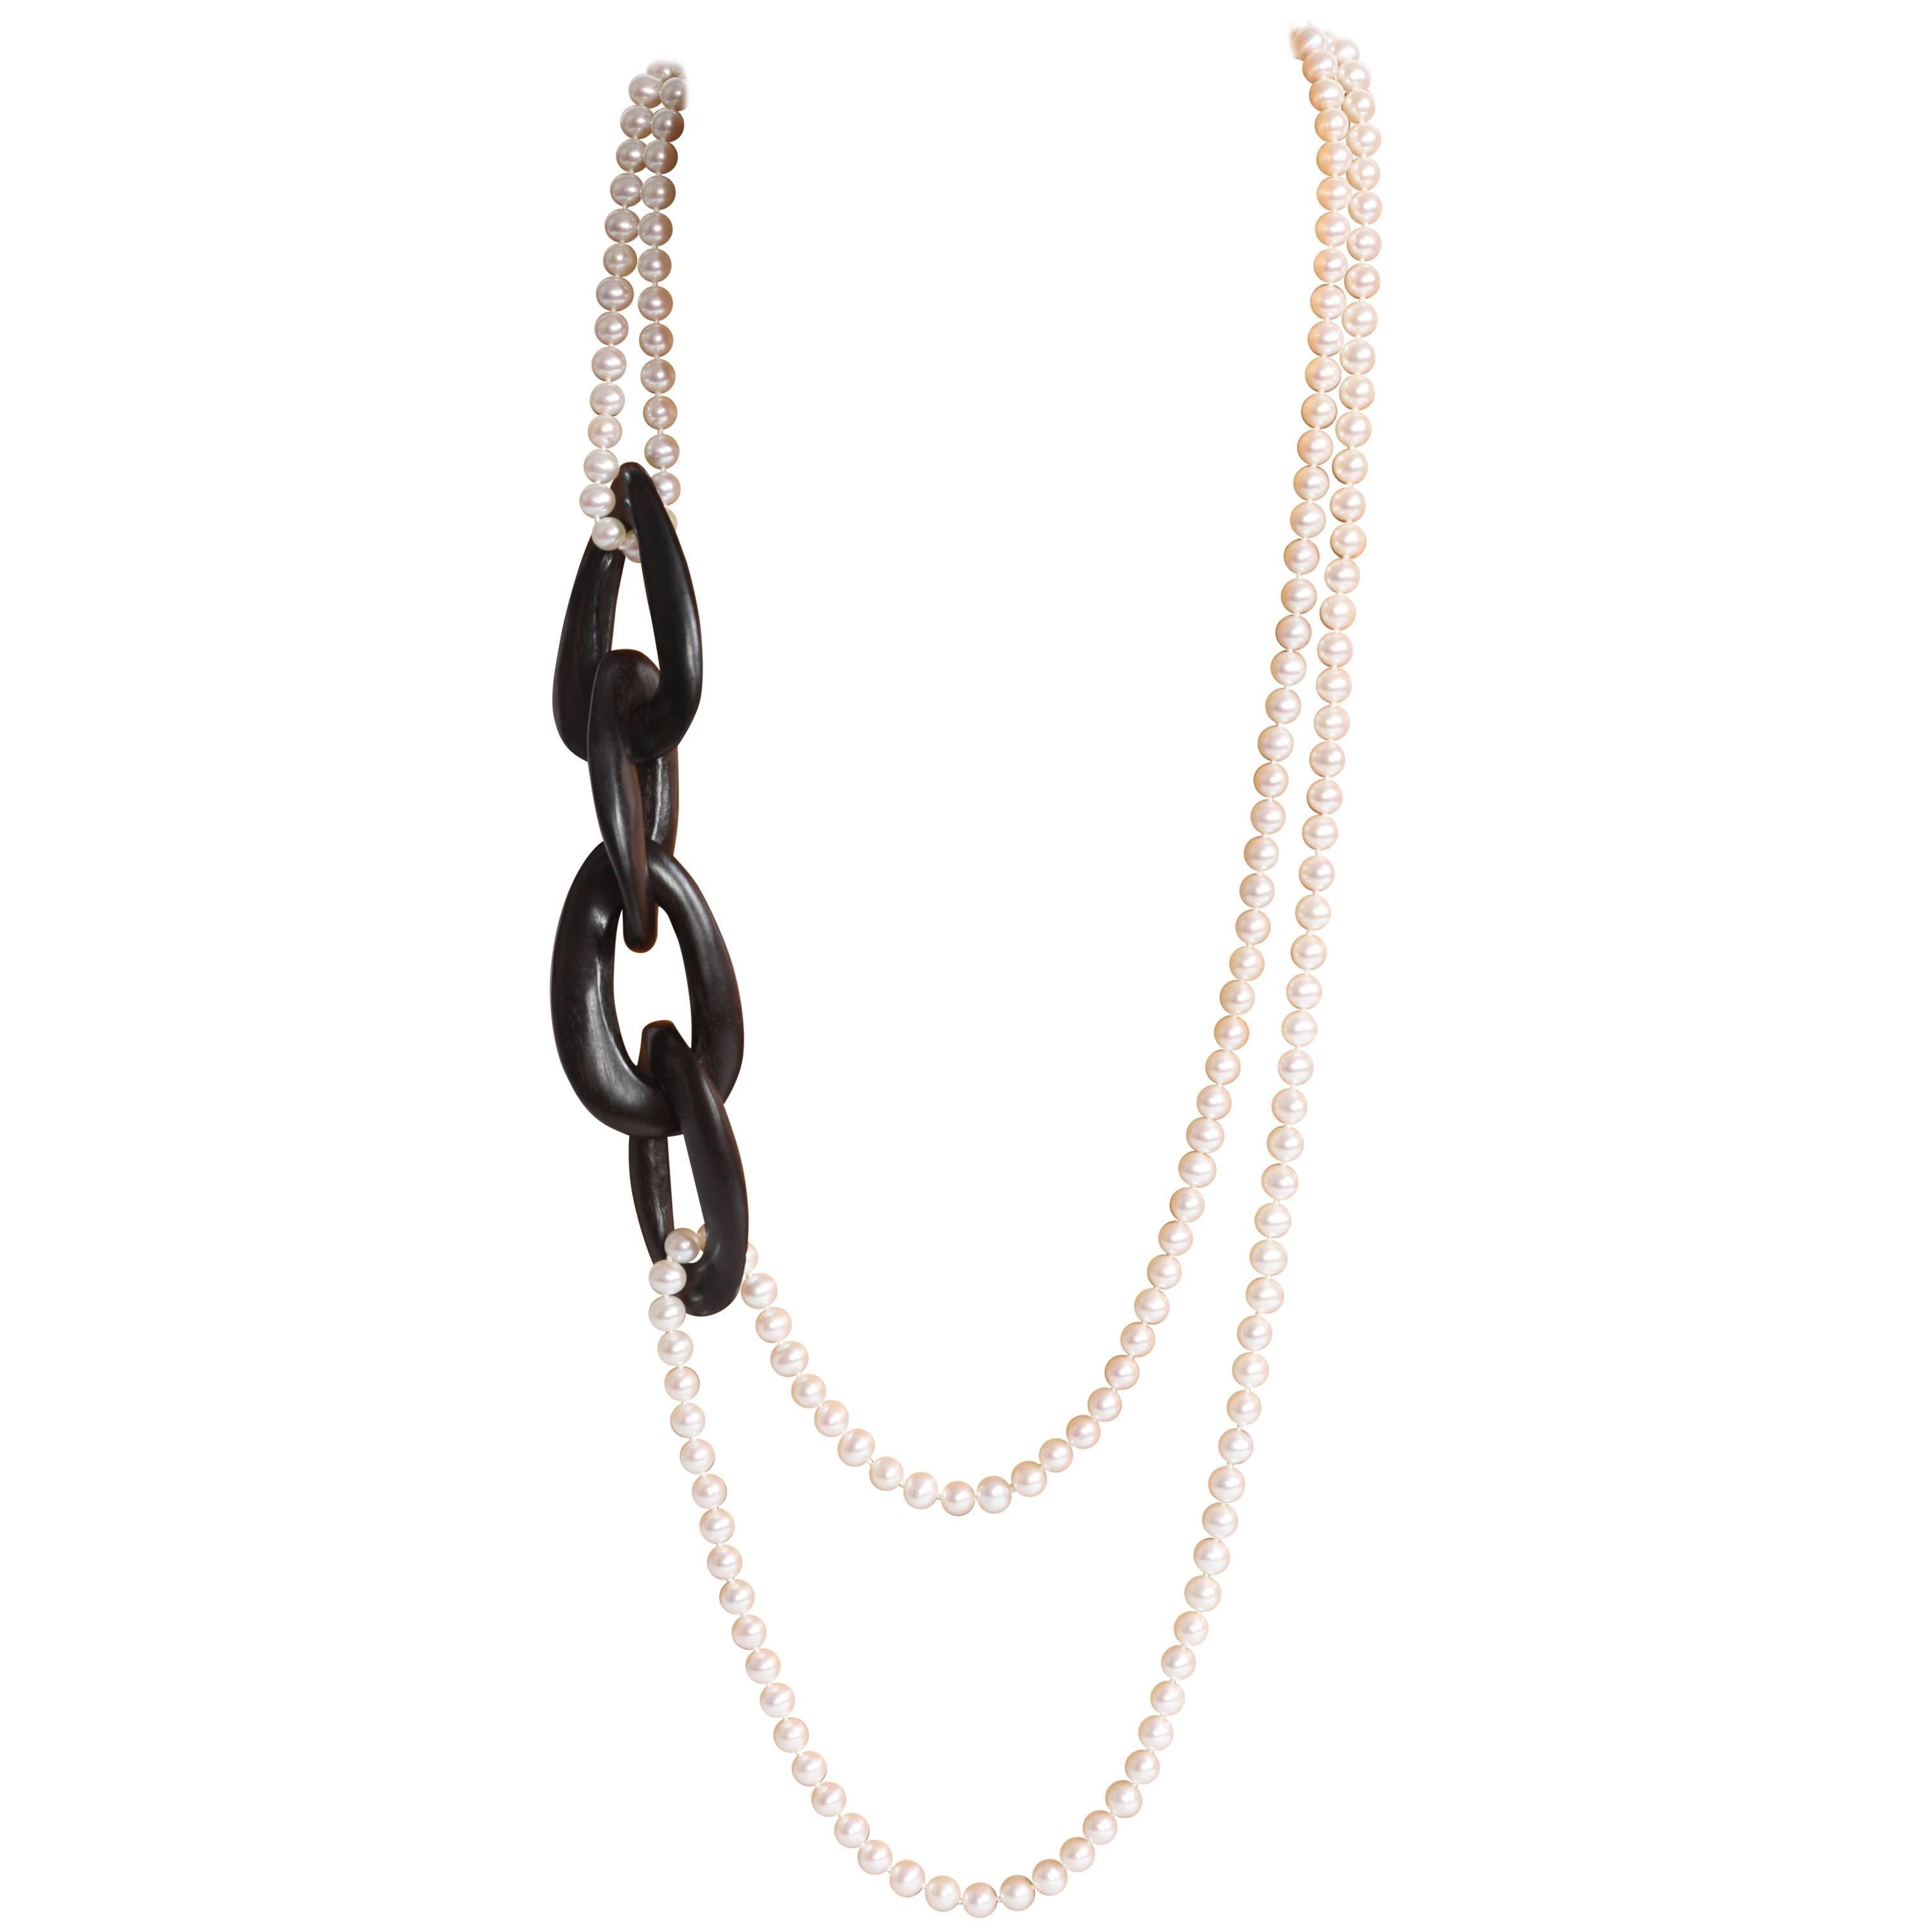 Ebony Wood and Freshwater Pearls Sautoir by Marion Jeantet